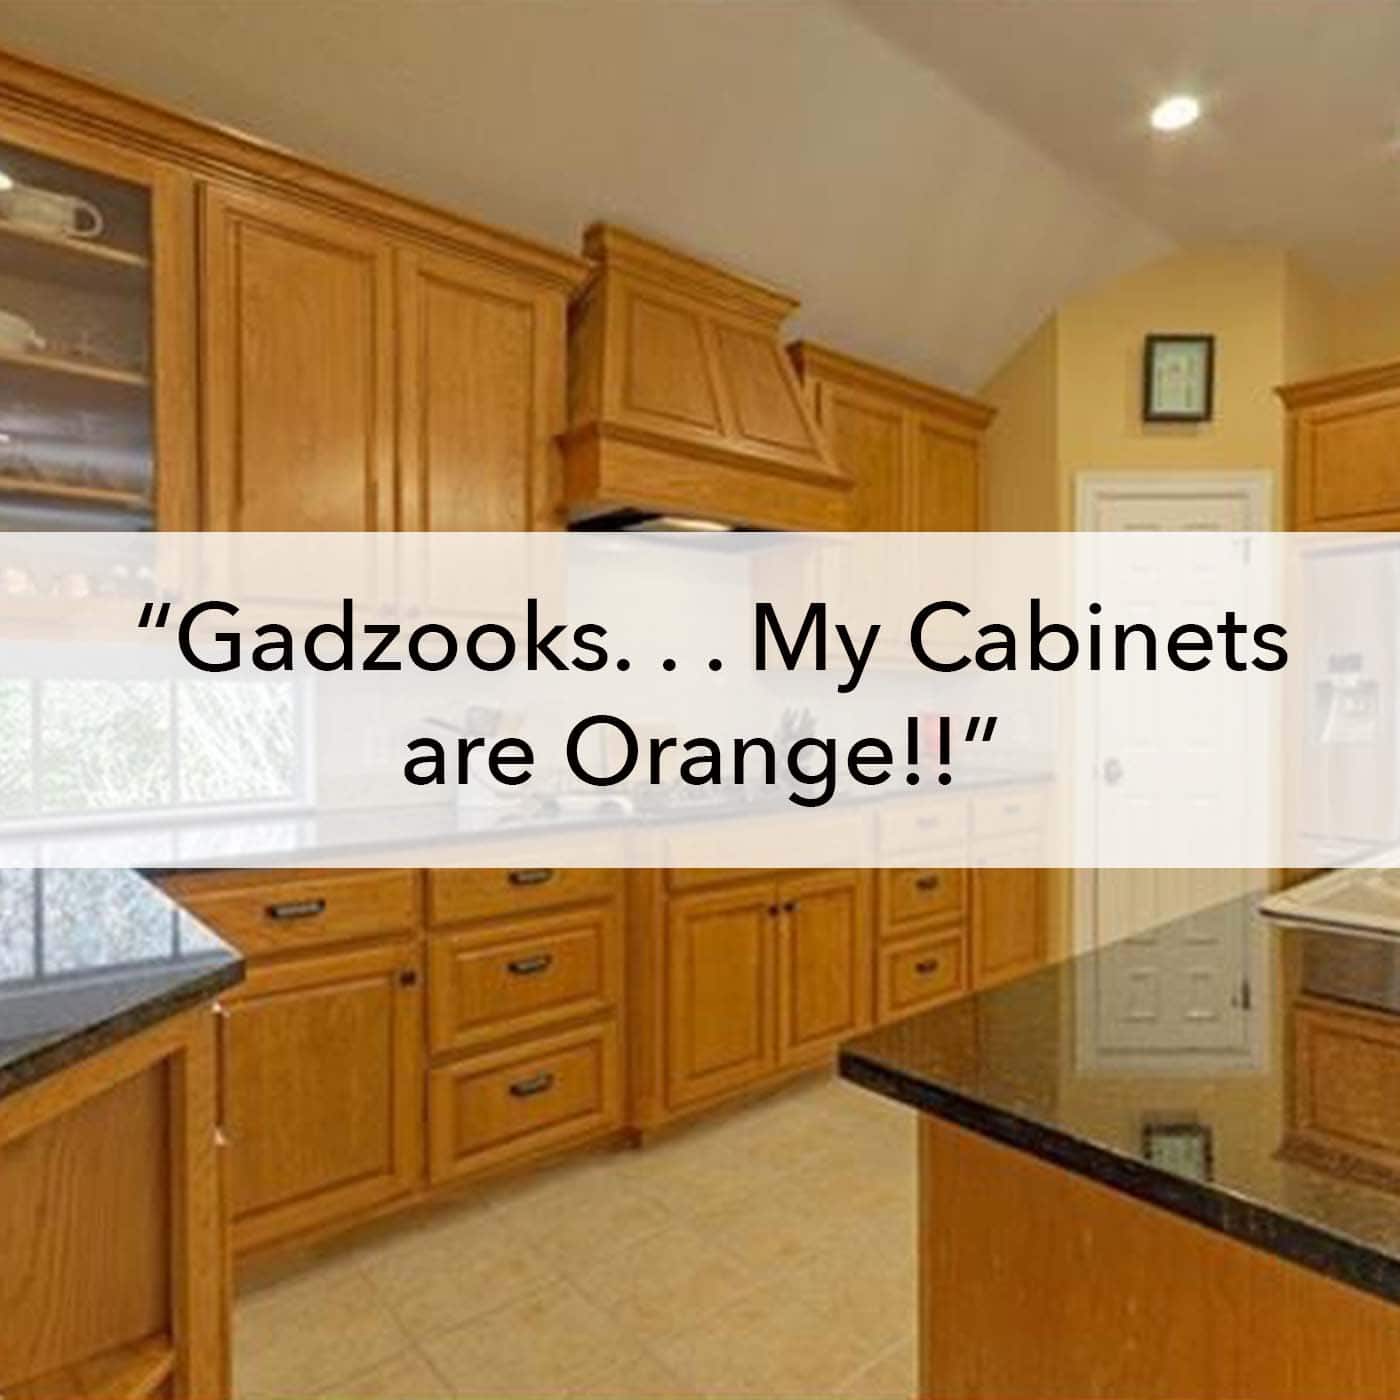 Updating Cabinets, cabinets are orange, blog